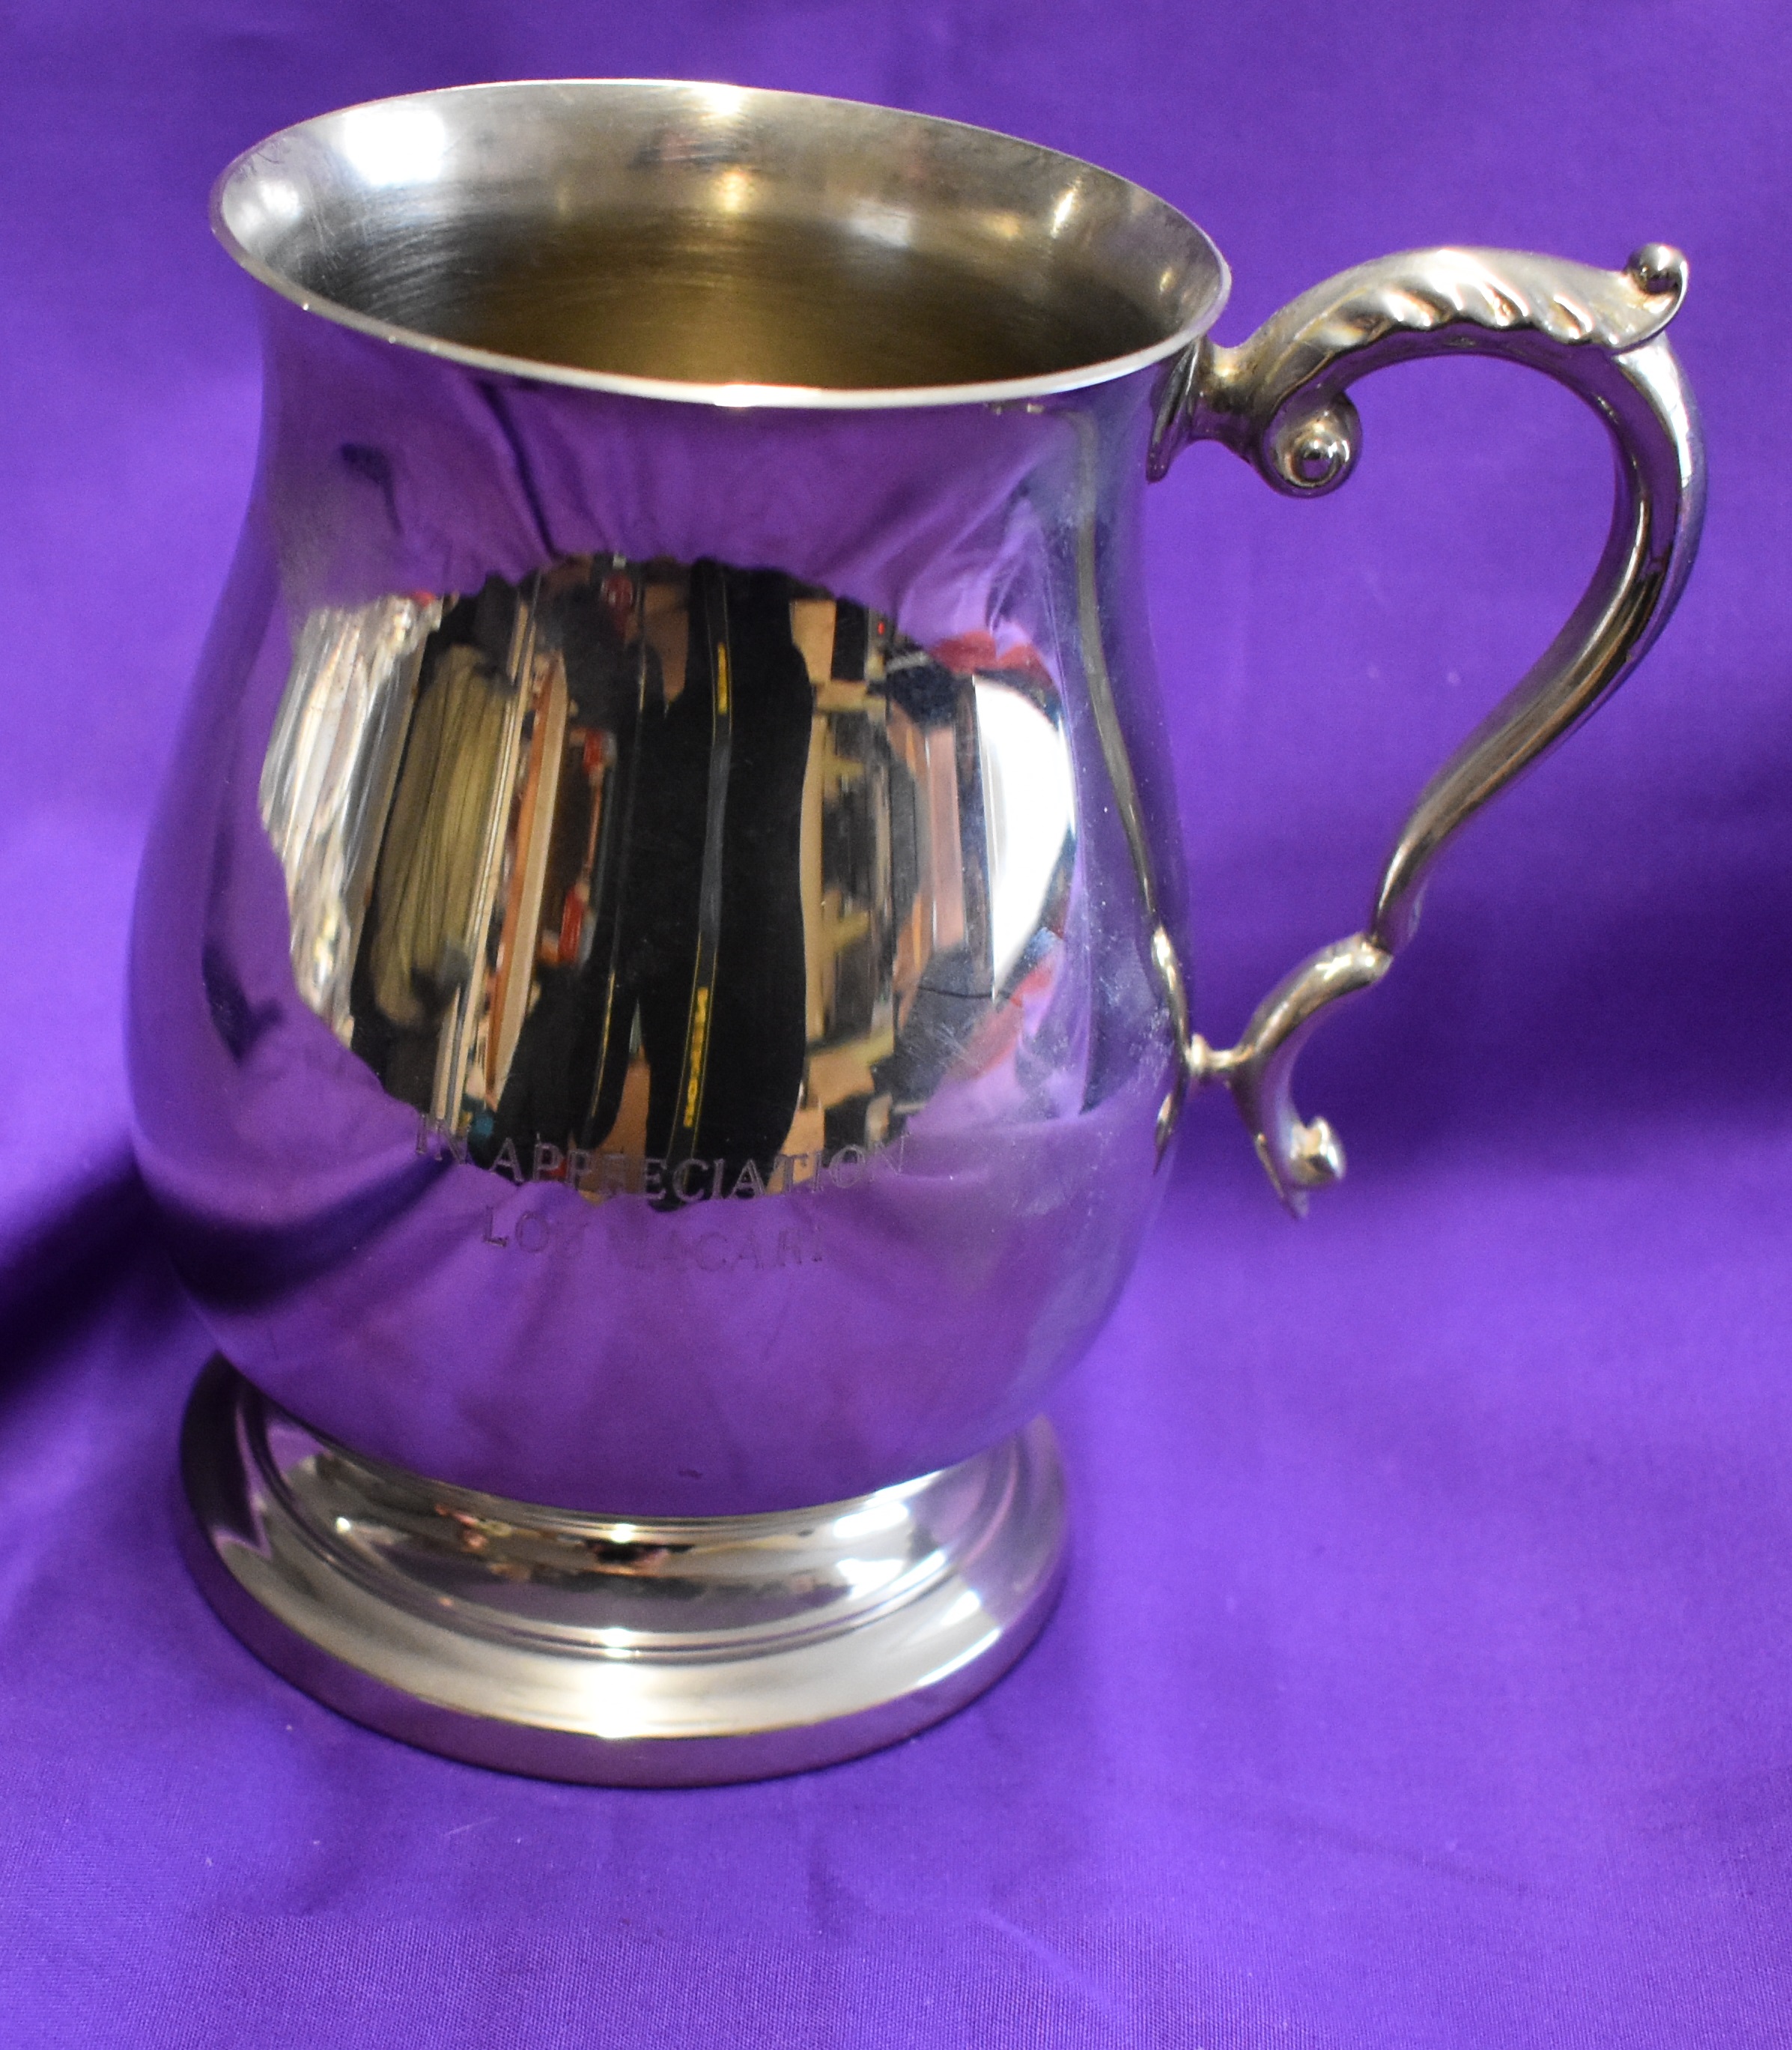 A silver plated goblet engraved simply with the words "In appreciation Lou Macari". Macari played